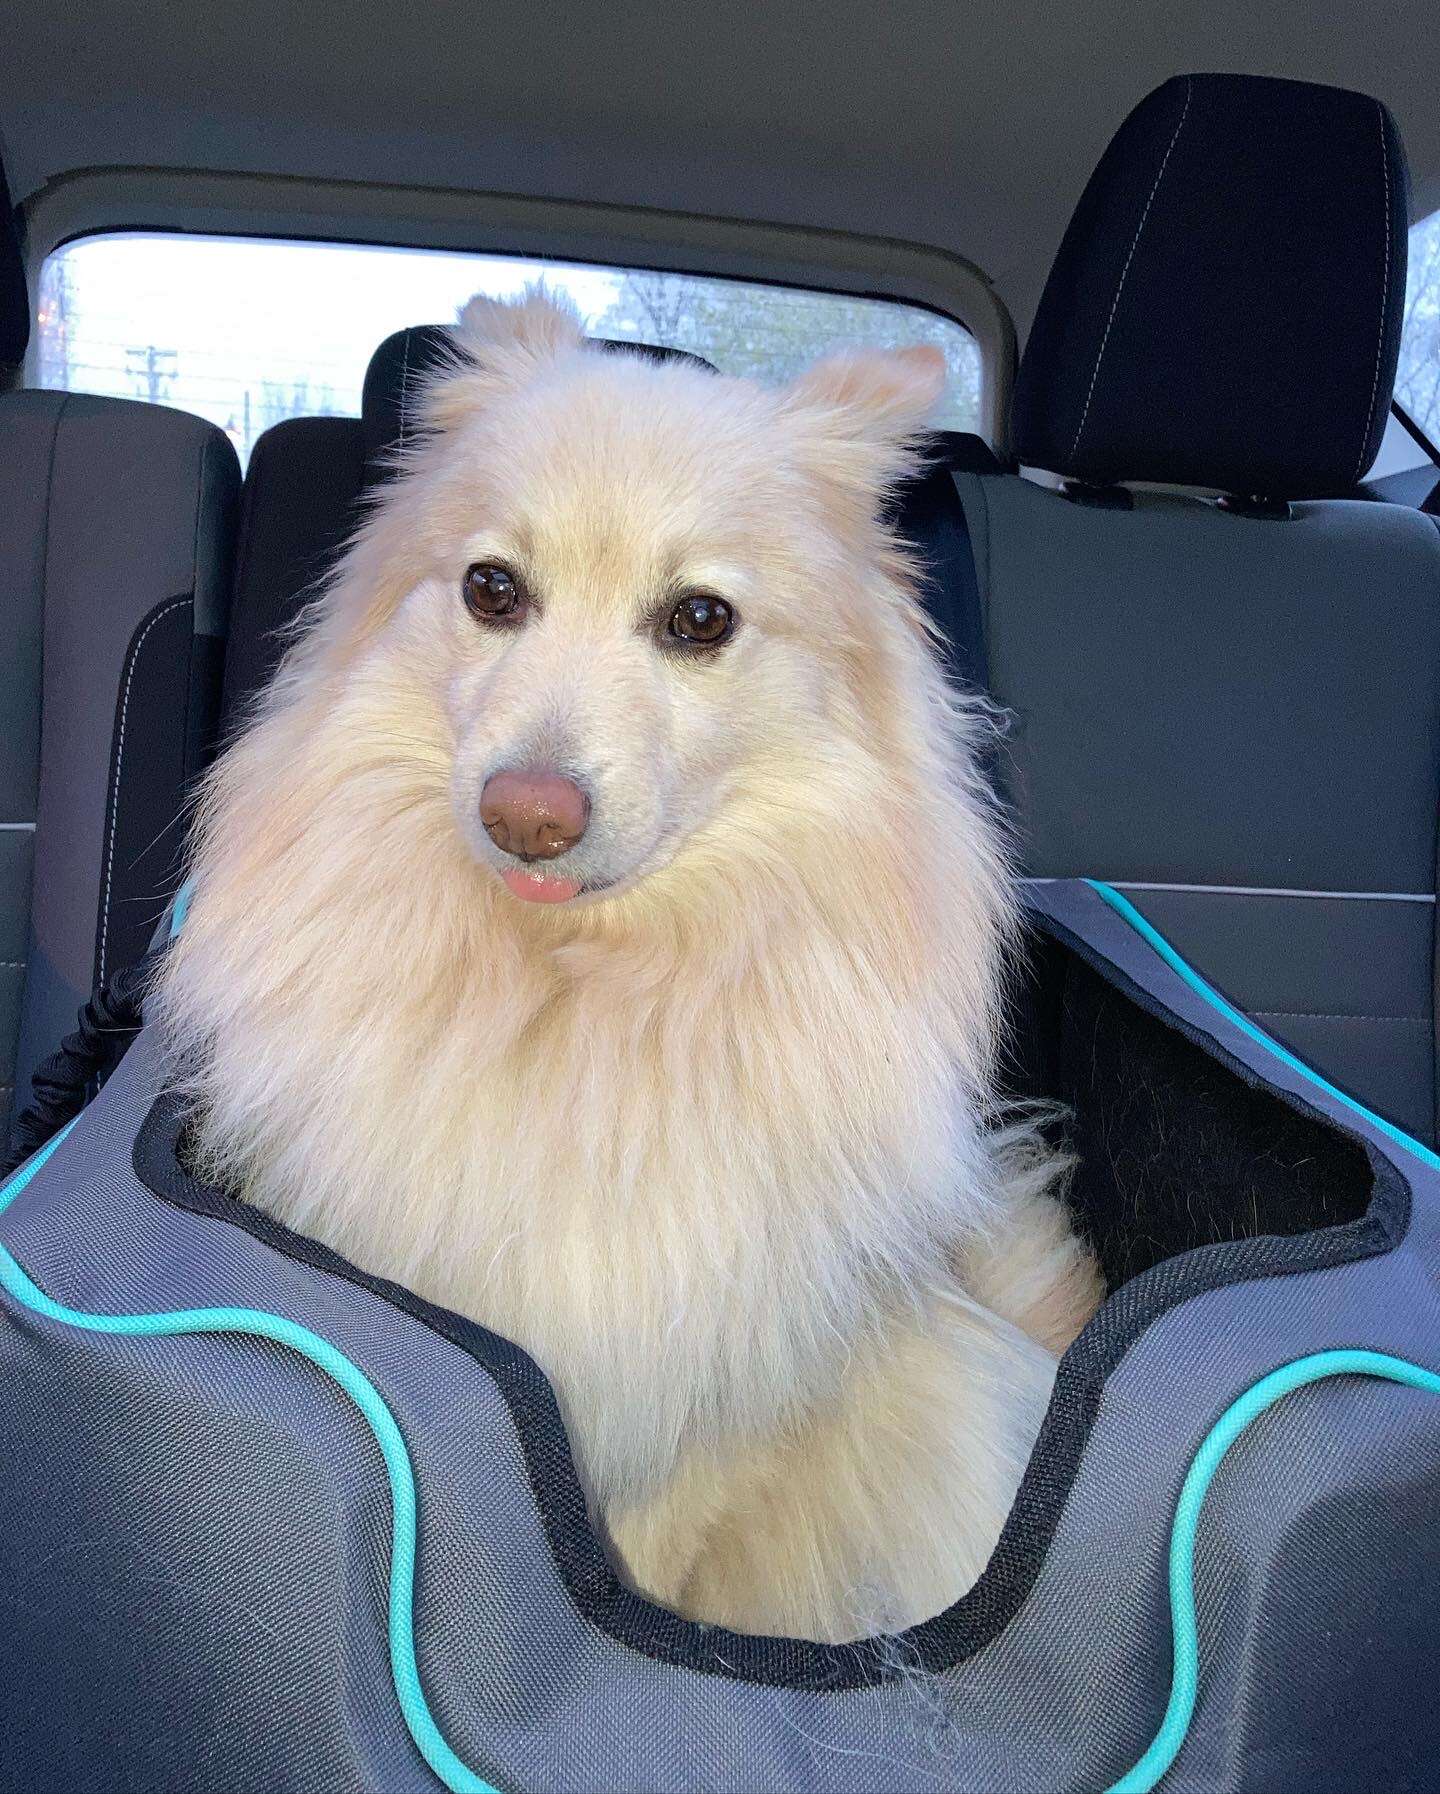 White dog rides in the backseat of a car.